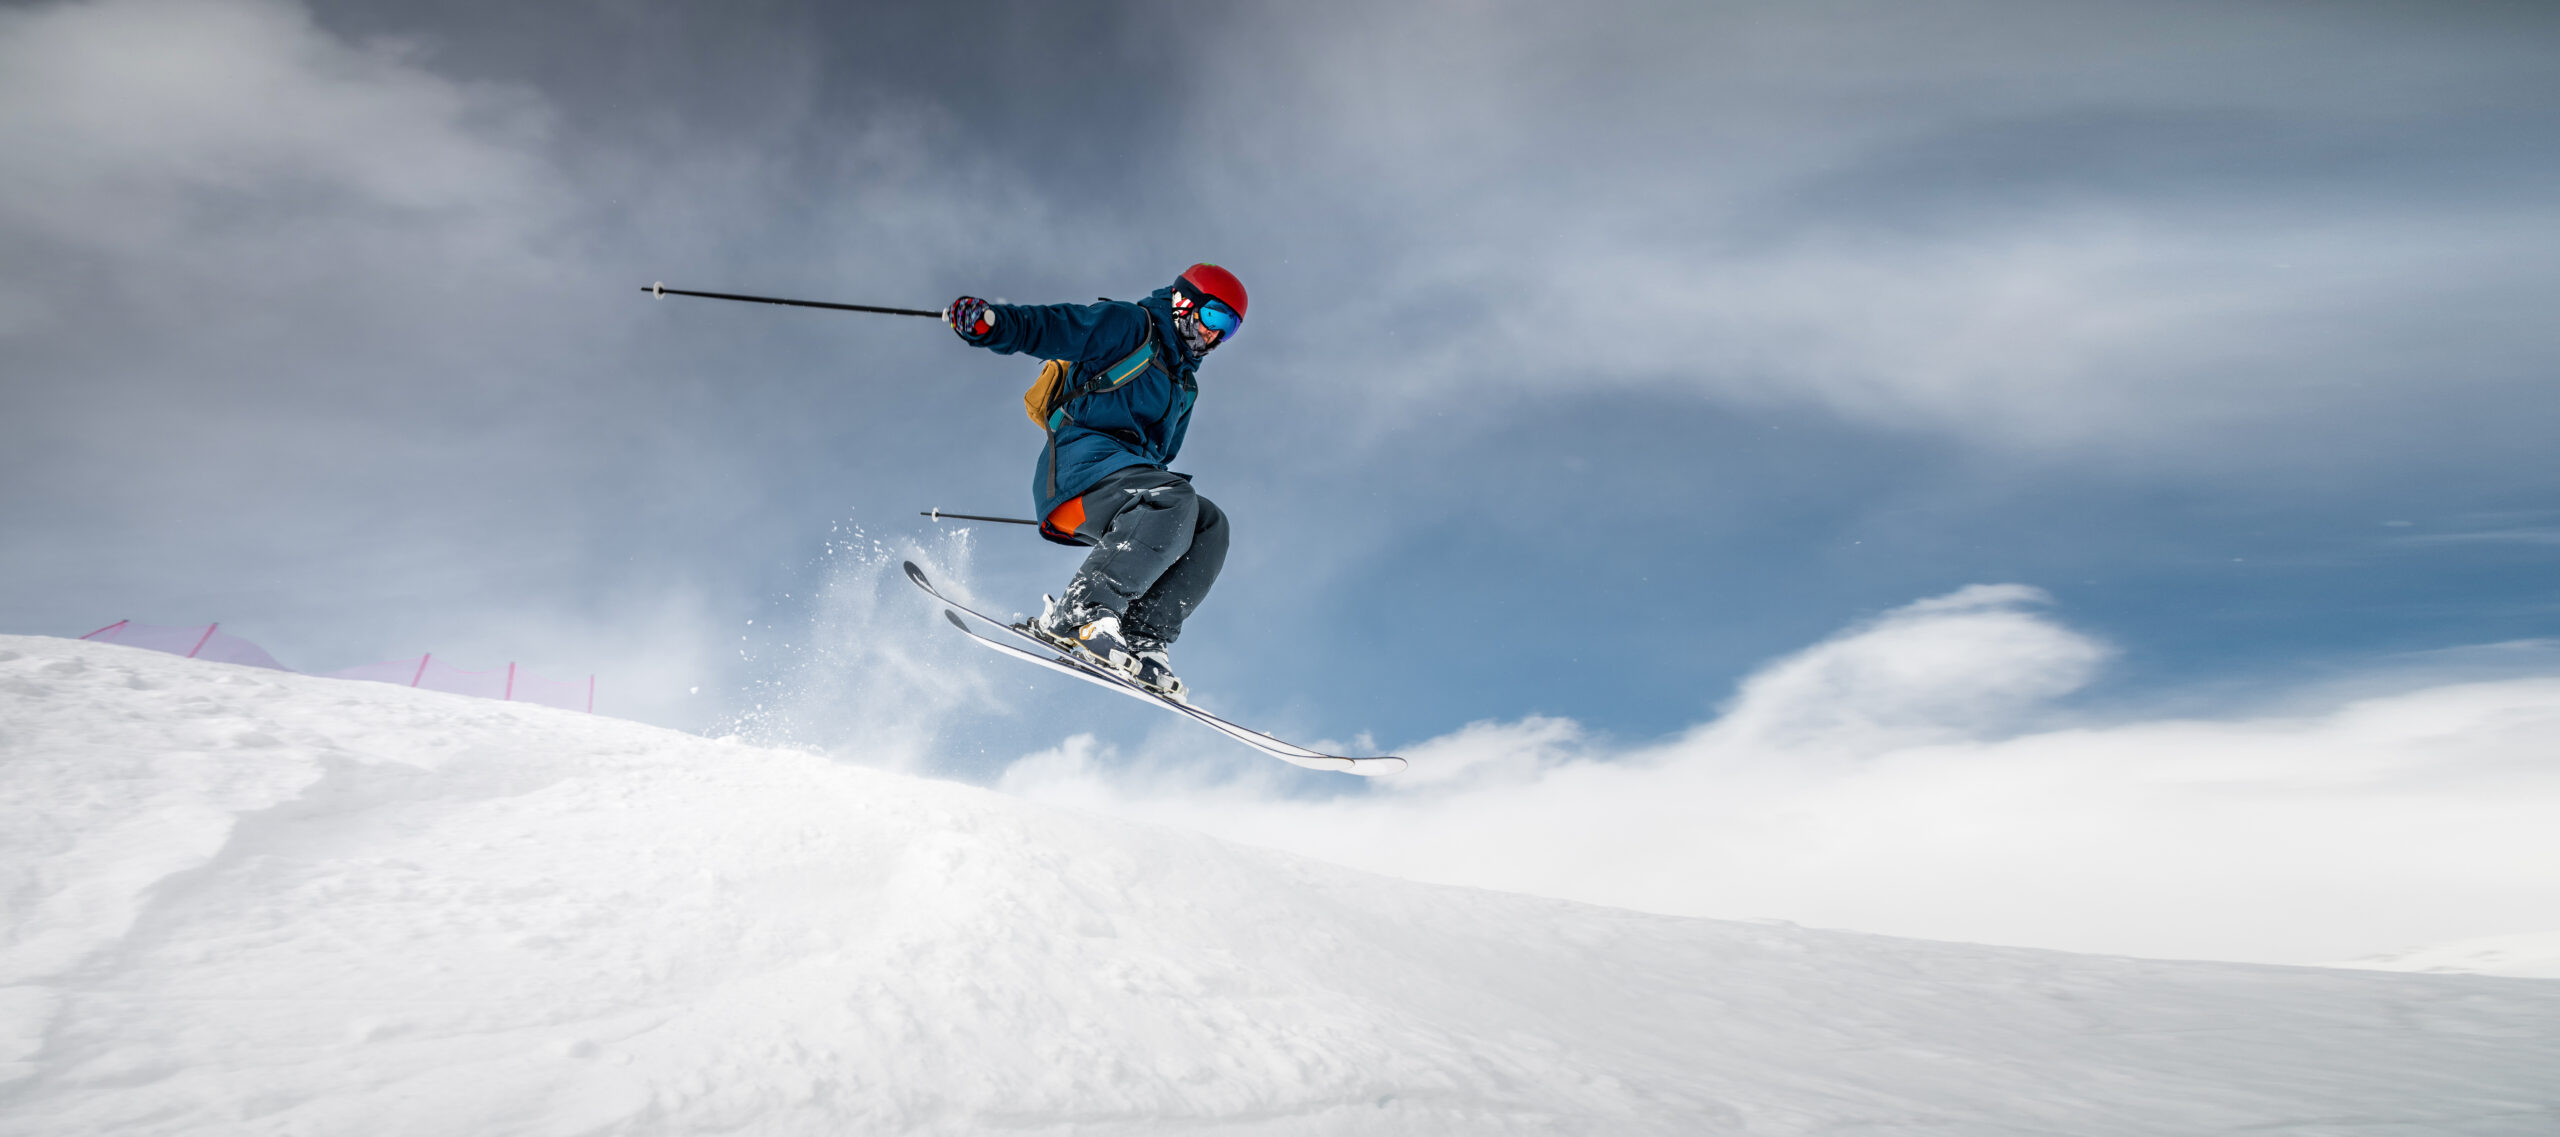 A sportsman skier in ski equipment jumps down a steep snowy slope of a mountain.